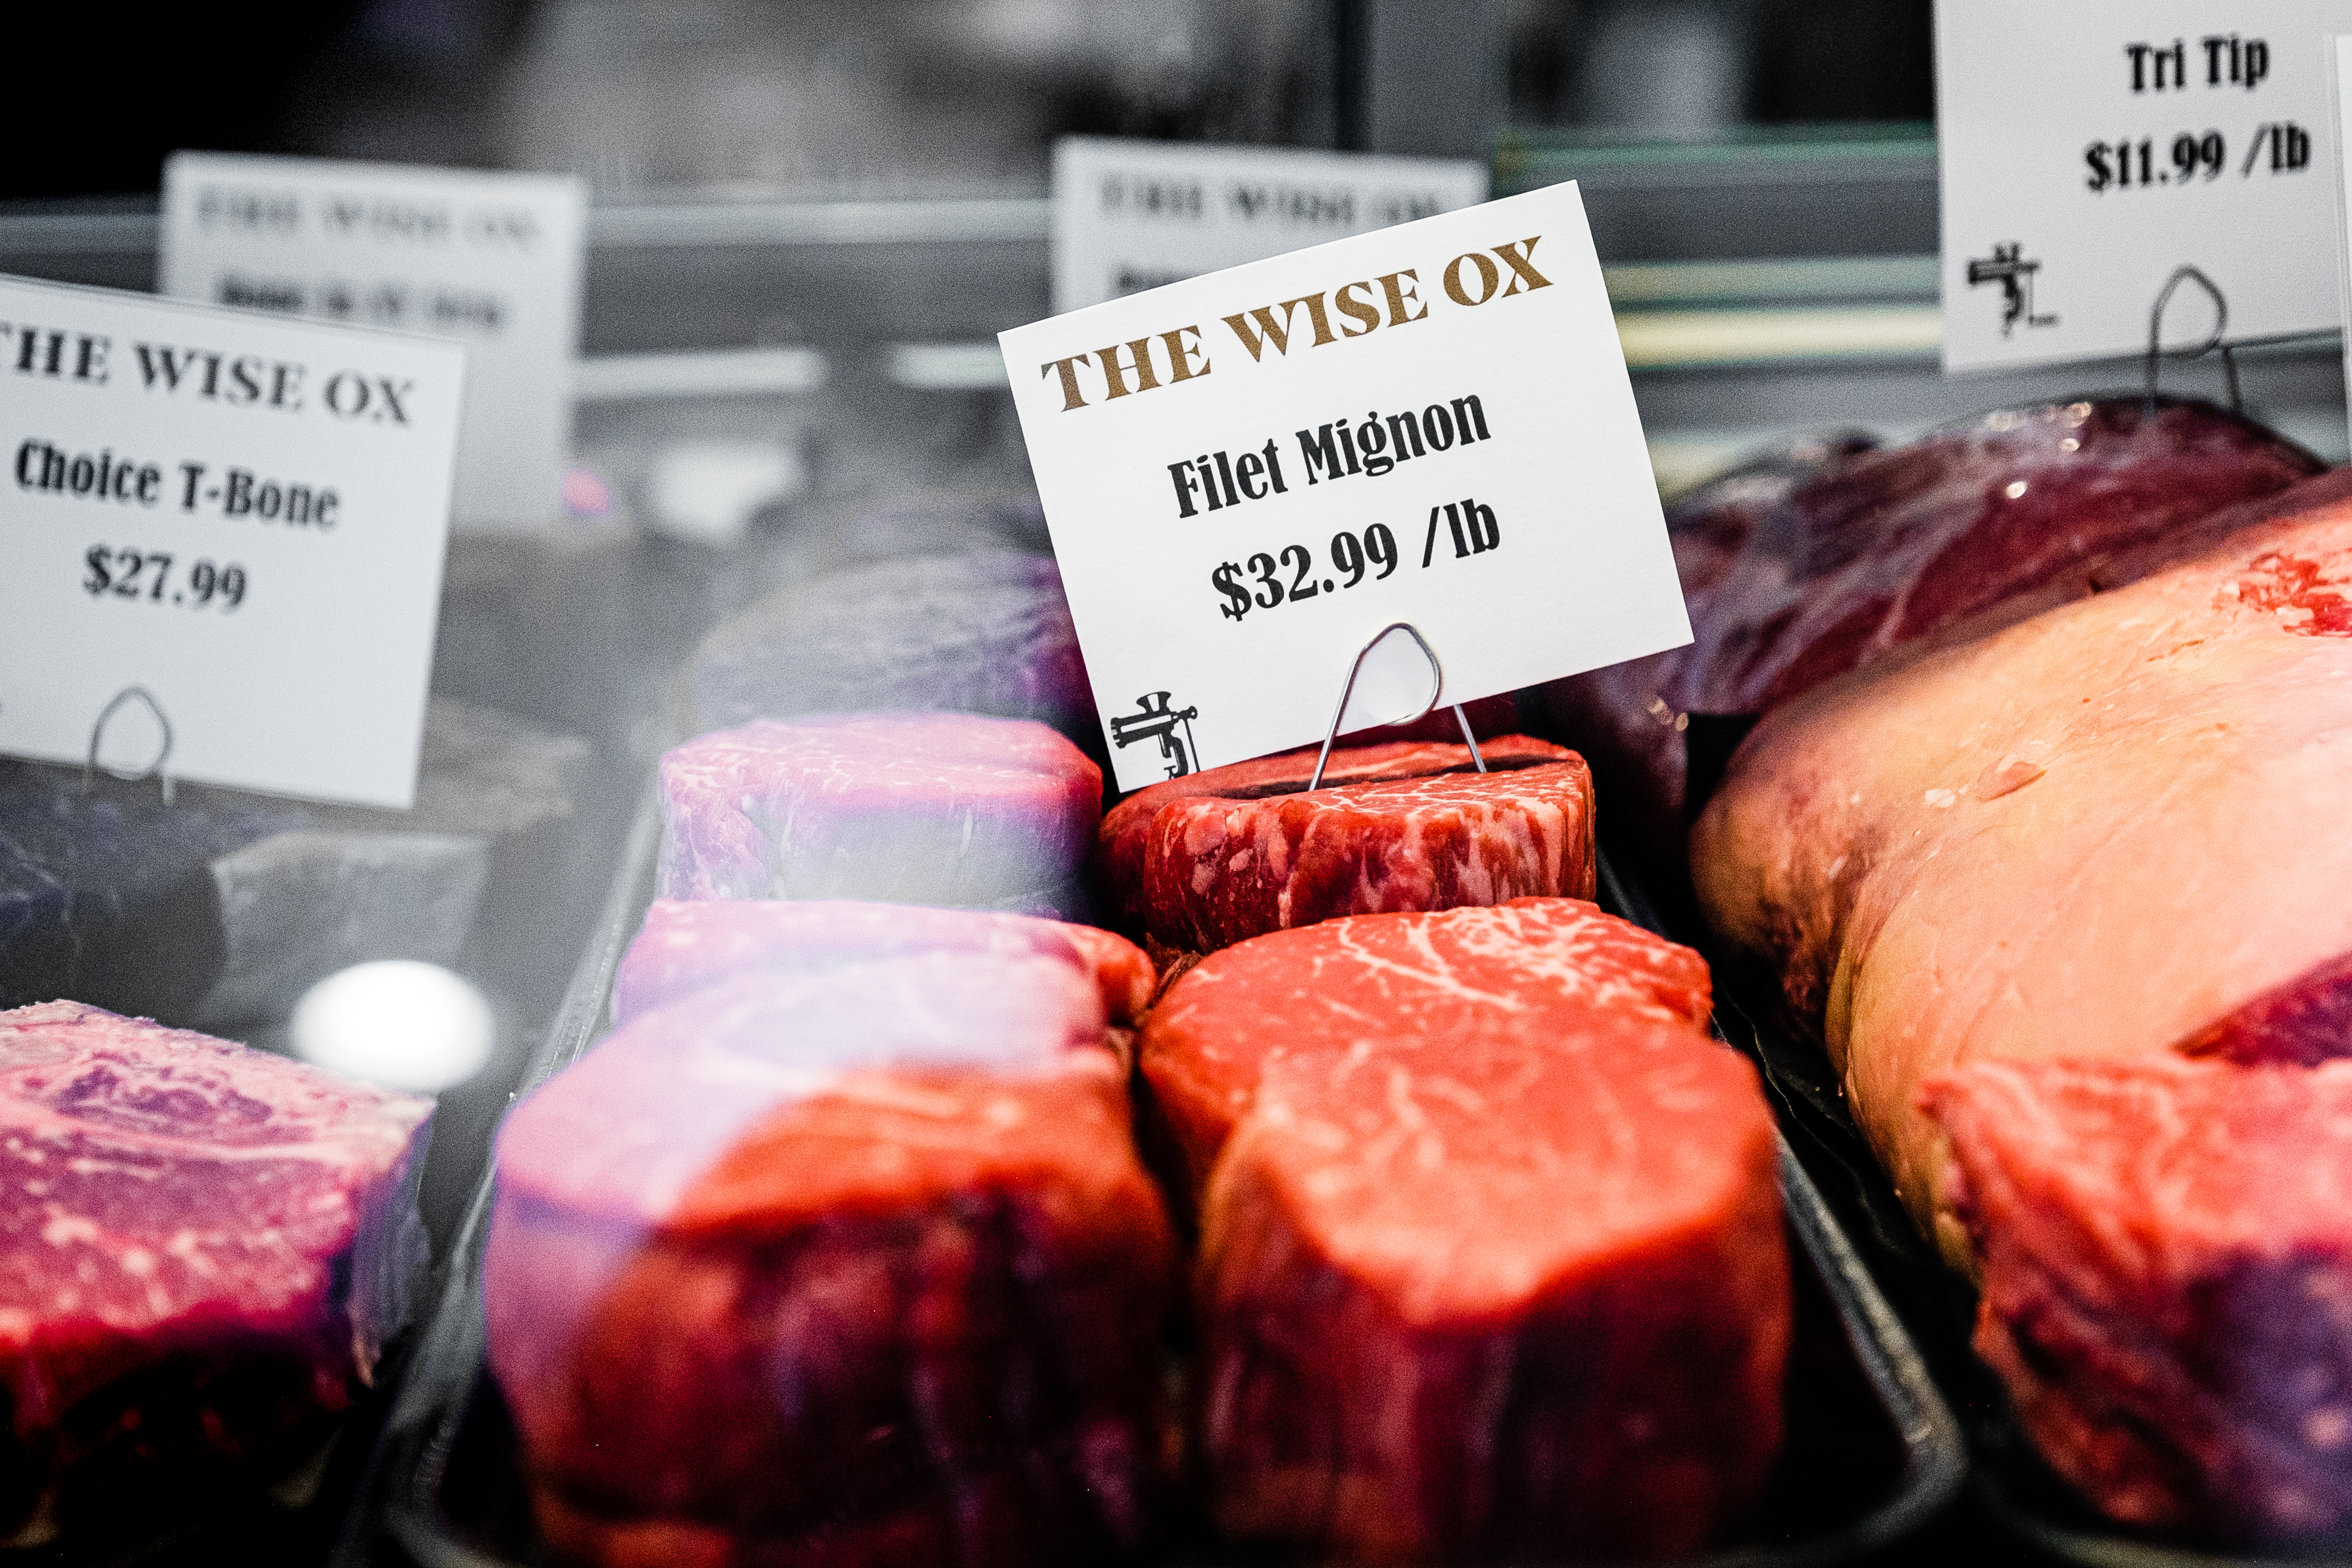 Filet mignon steaks and other cuts inside butcher case at The Wise Ox